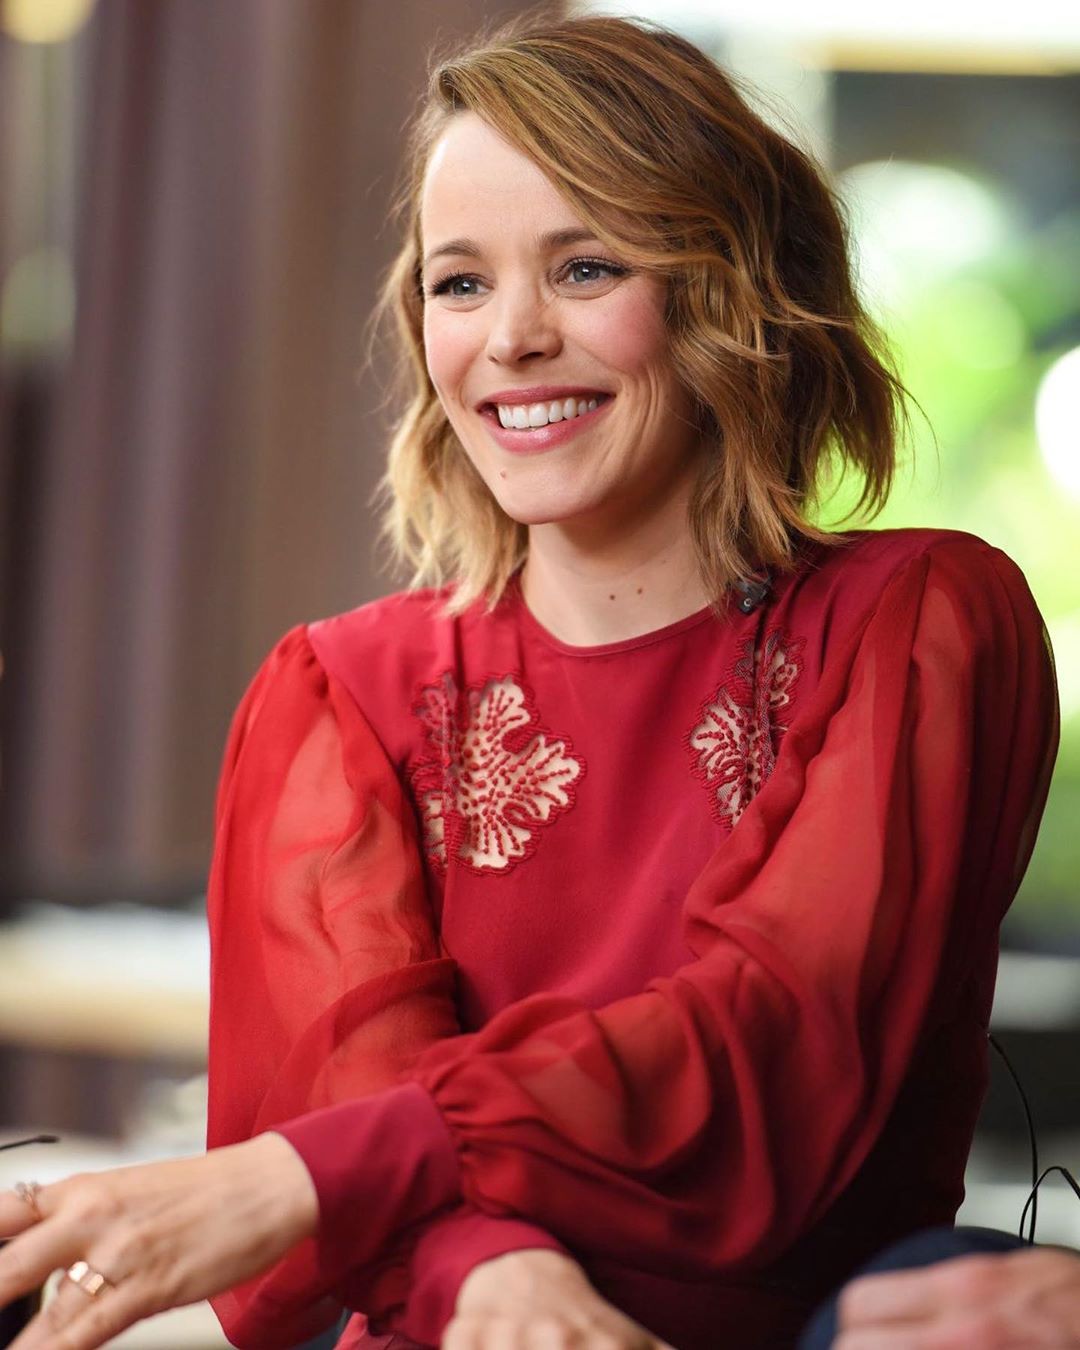 Rachel McAdams - 3 years ago today, September 10, 2017... I don’t think I’ve seen Rachel so happy while promoting a movie ❤️ Even in interviews & articles, she was just so excited about Disobedience ❤...